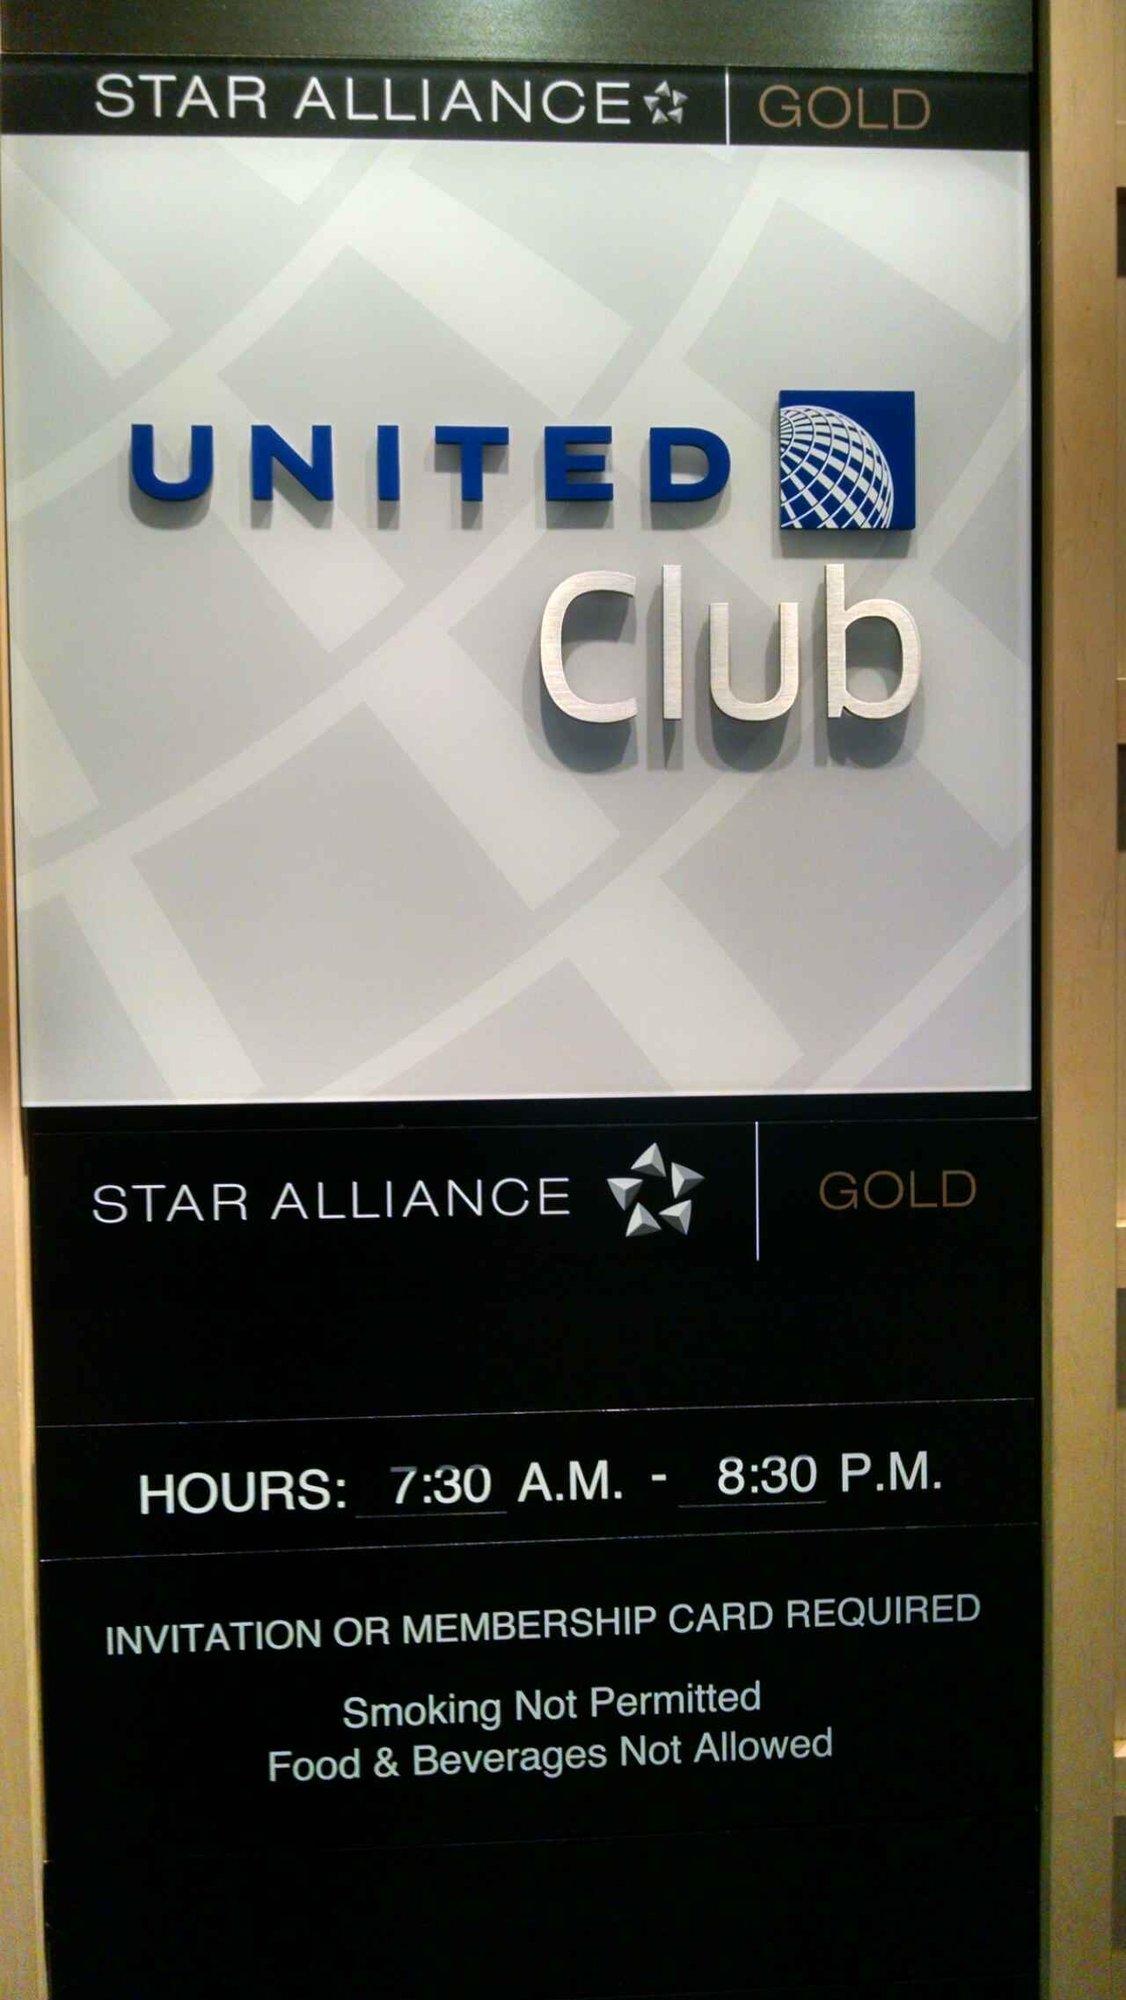 United Airlines United Club image 12 of 52